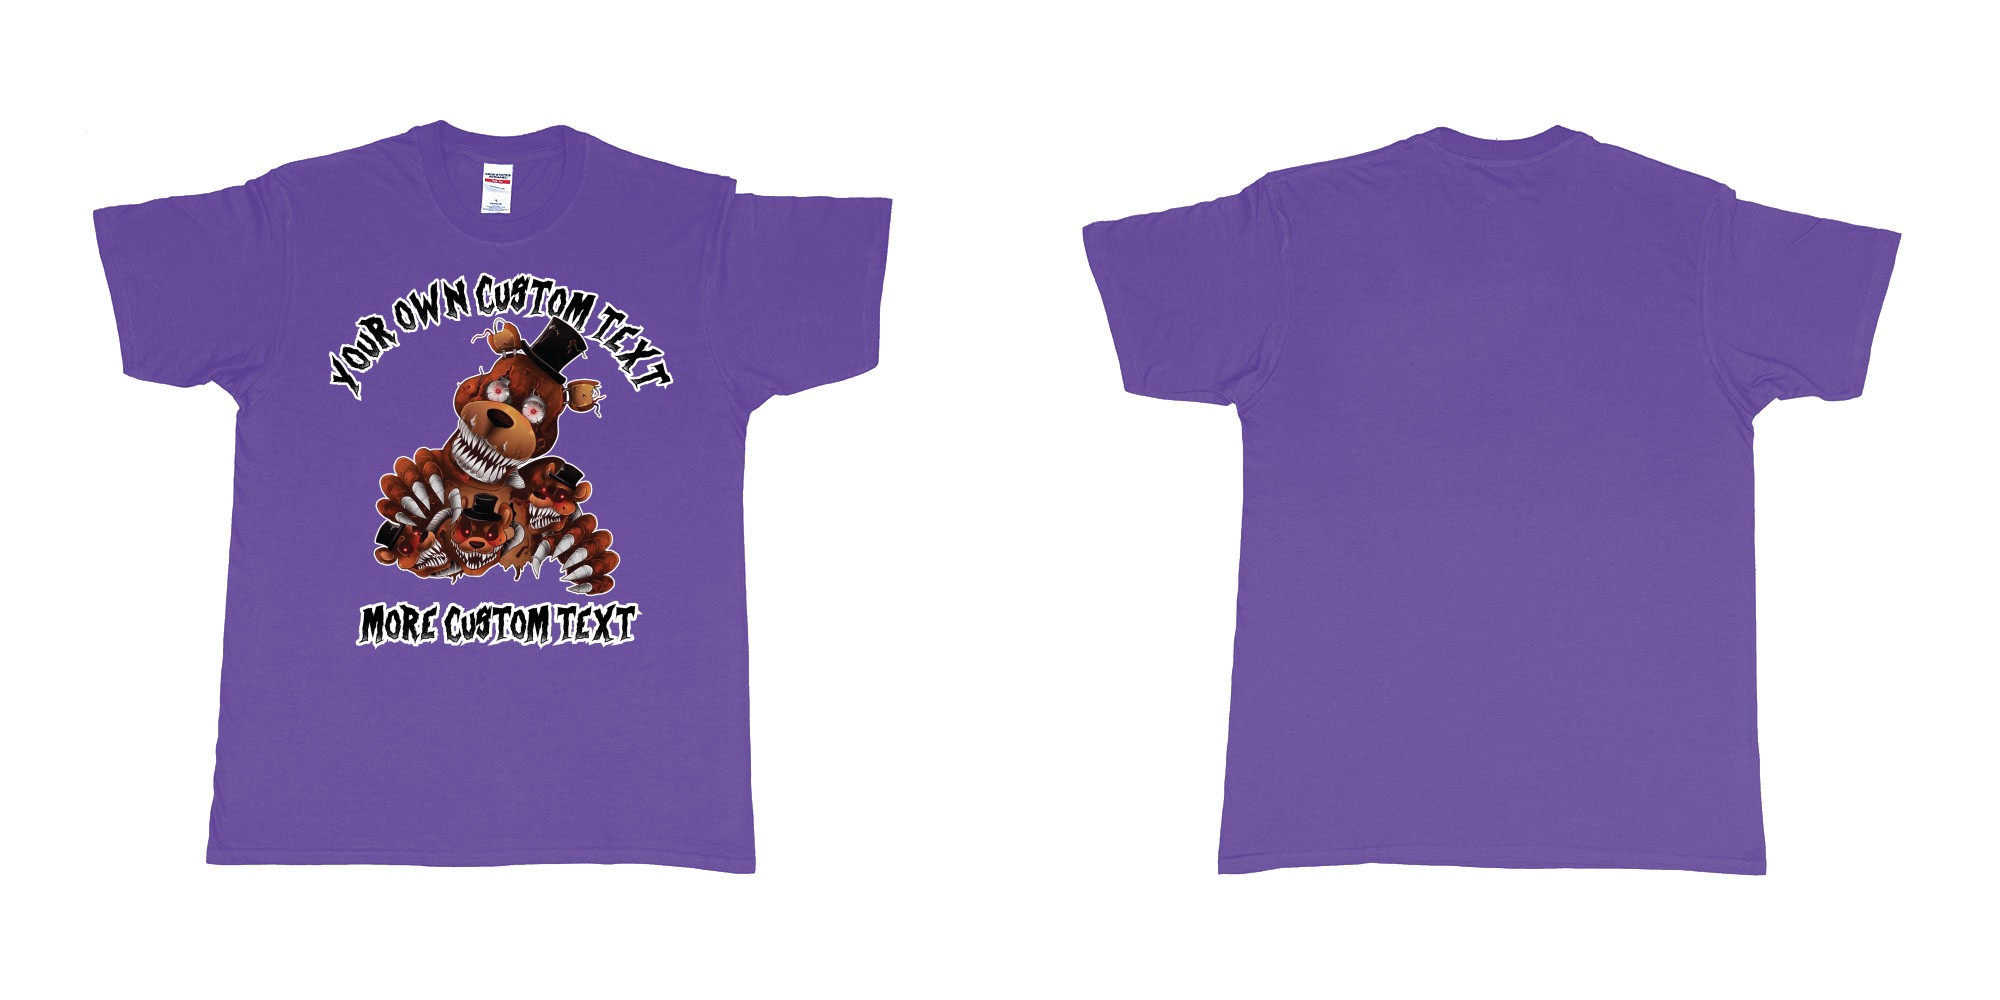 Custom tshirt design five nights at freddy scary bears in fabric color purple choice your own text made in Bali by The Pirate Way